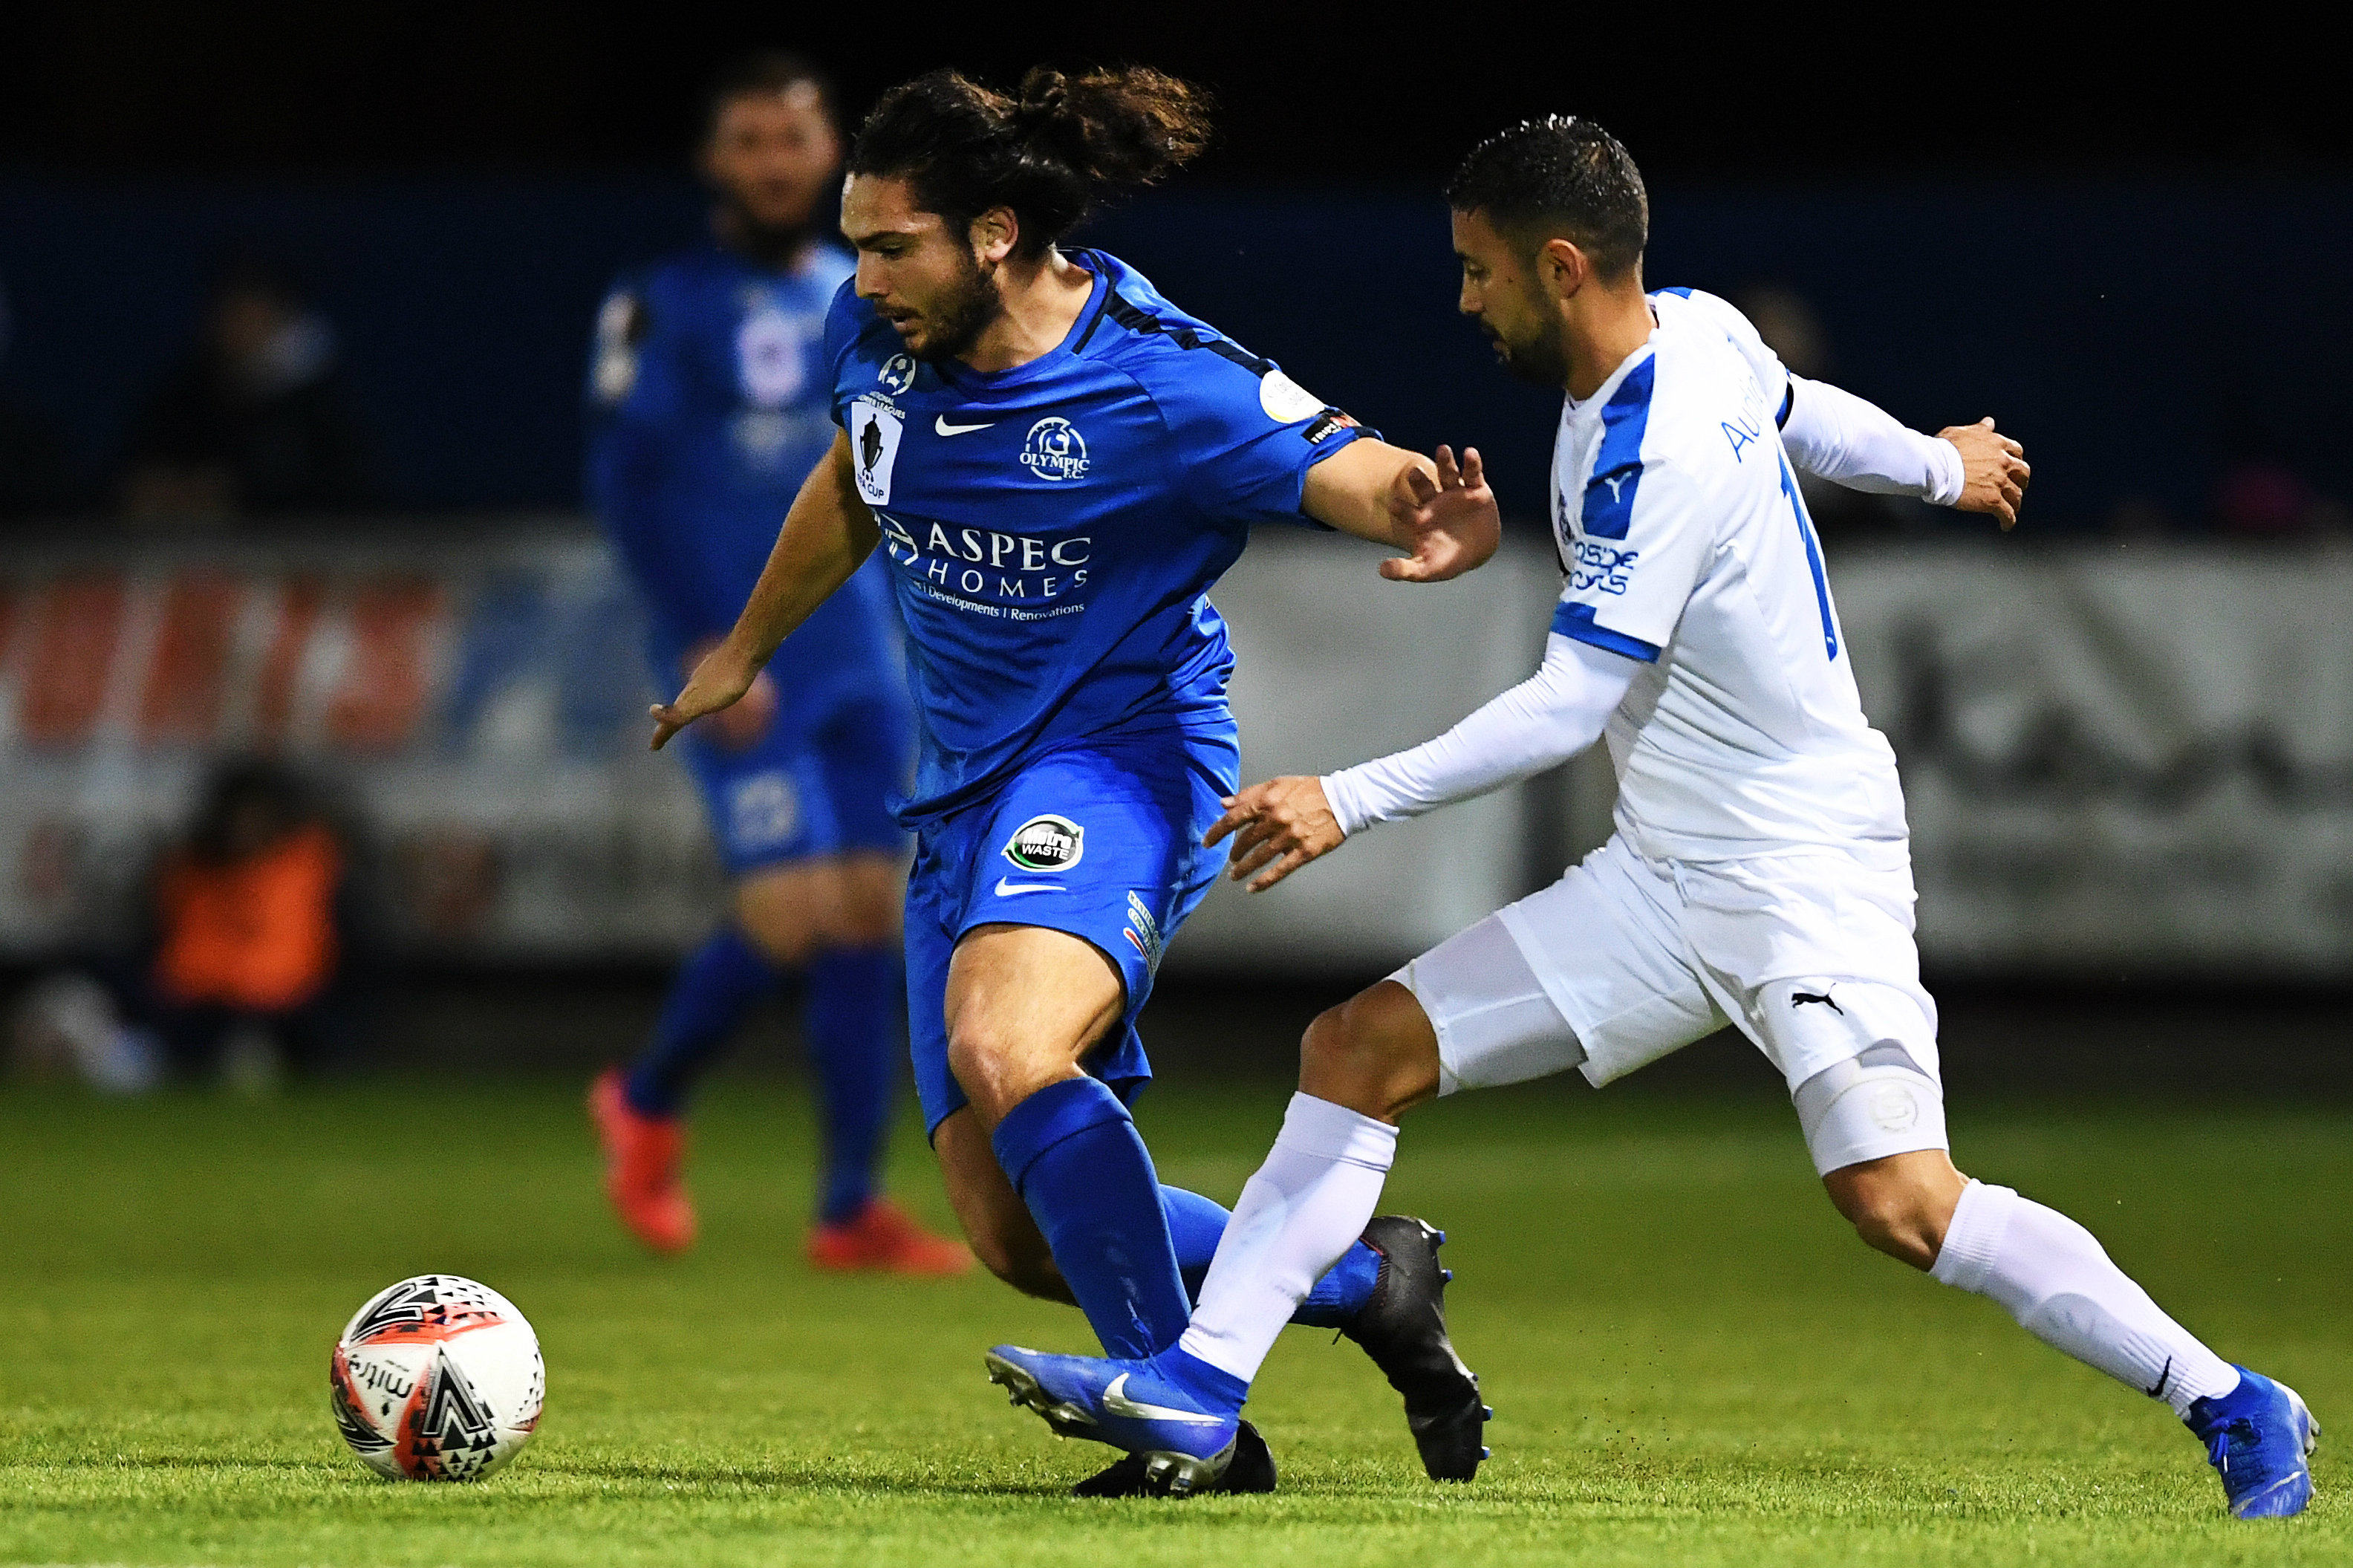 Adelaide Olympic's Christos Pounendis in action in the FFA Cup